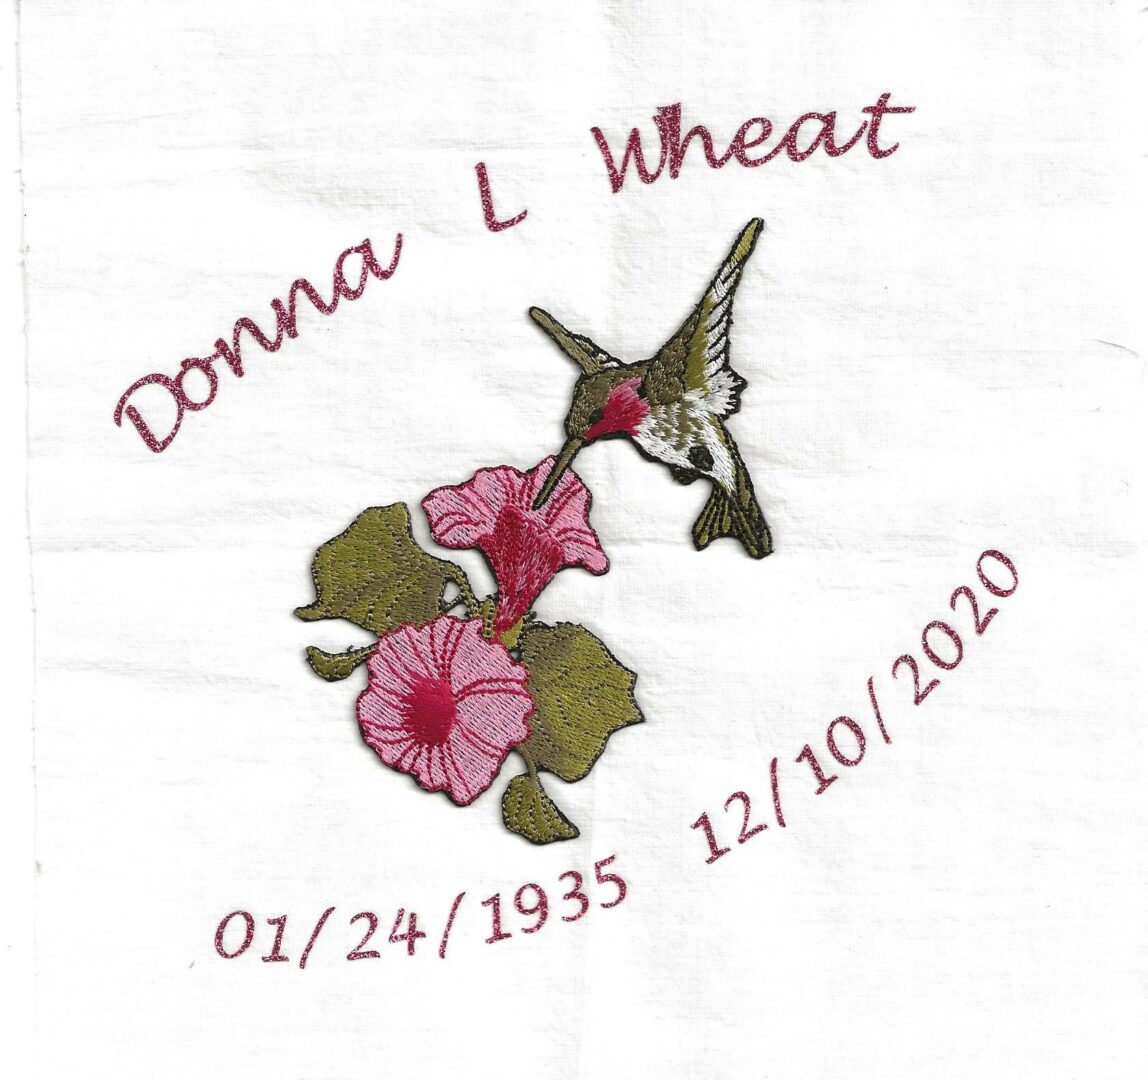 IN MEMORY OF DONNA L. WHEAT - 01/24/1935 - 12/10/2020